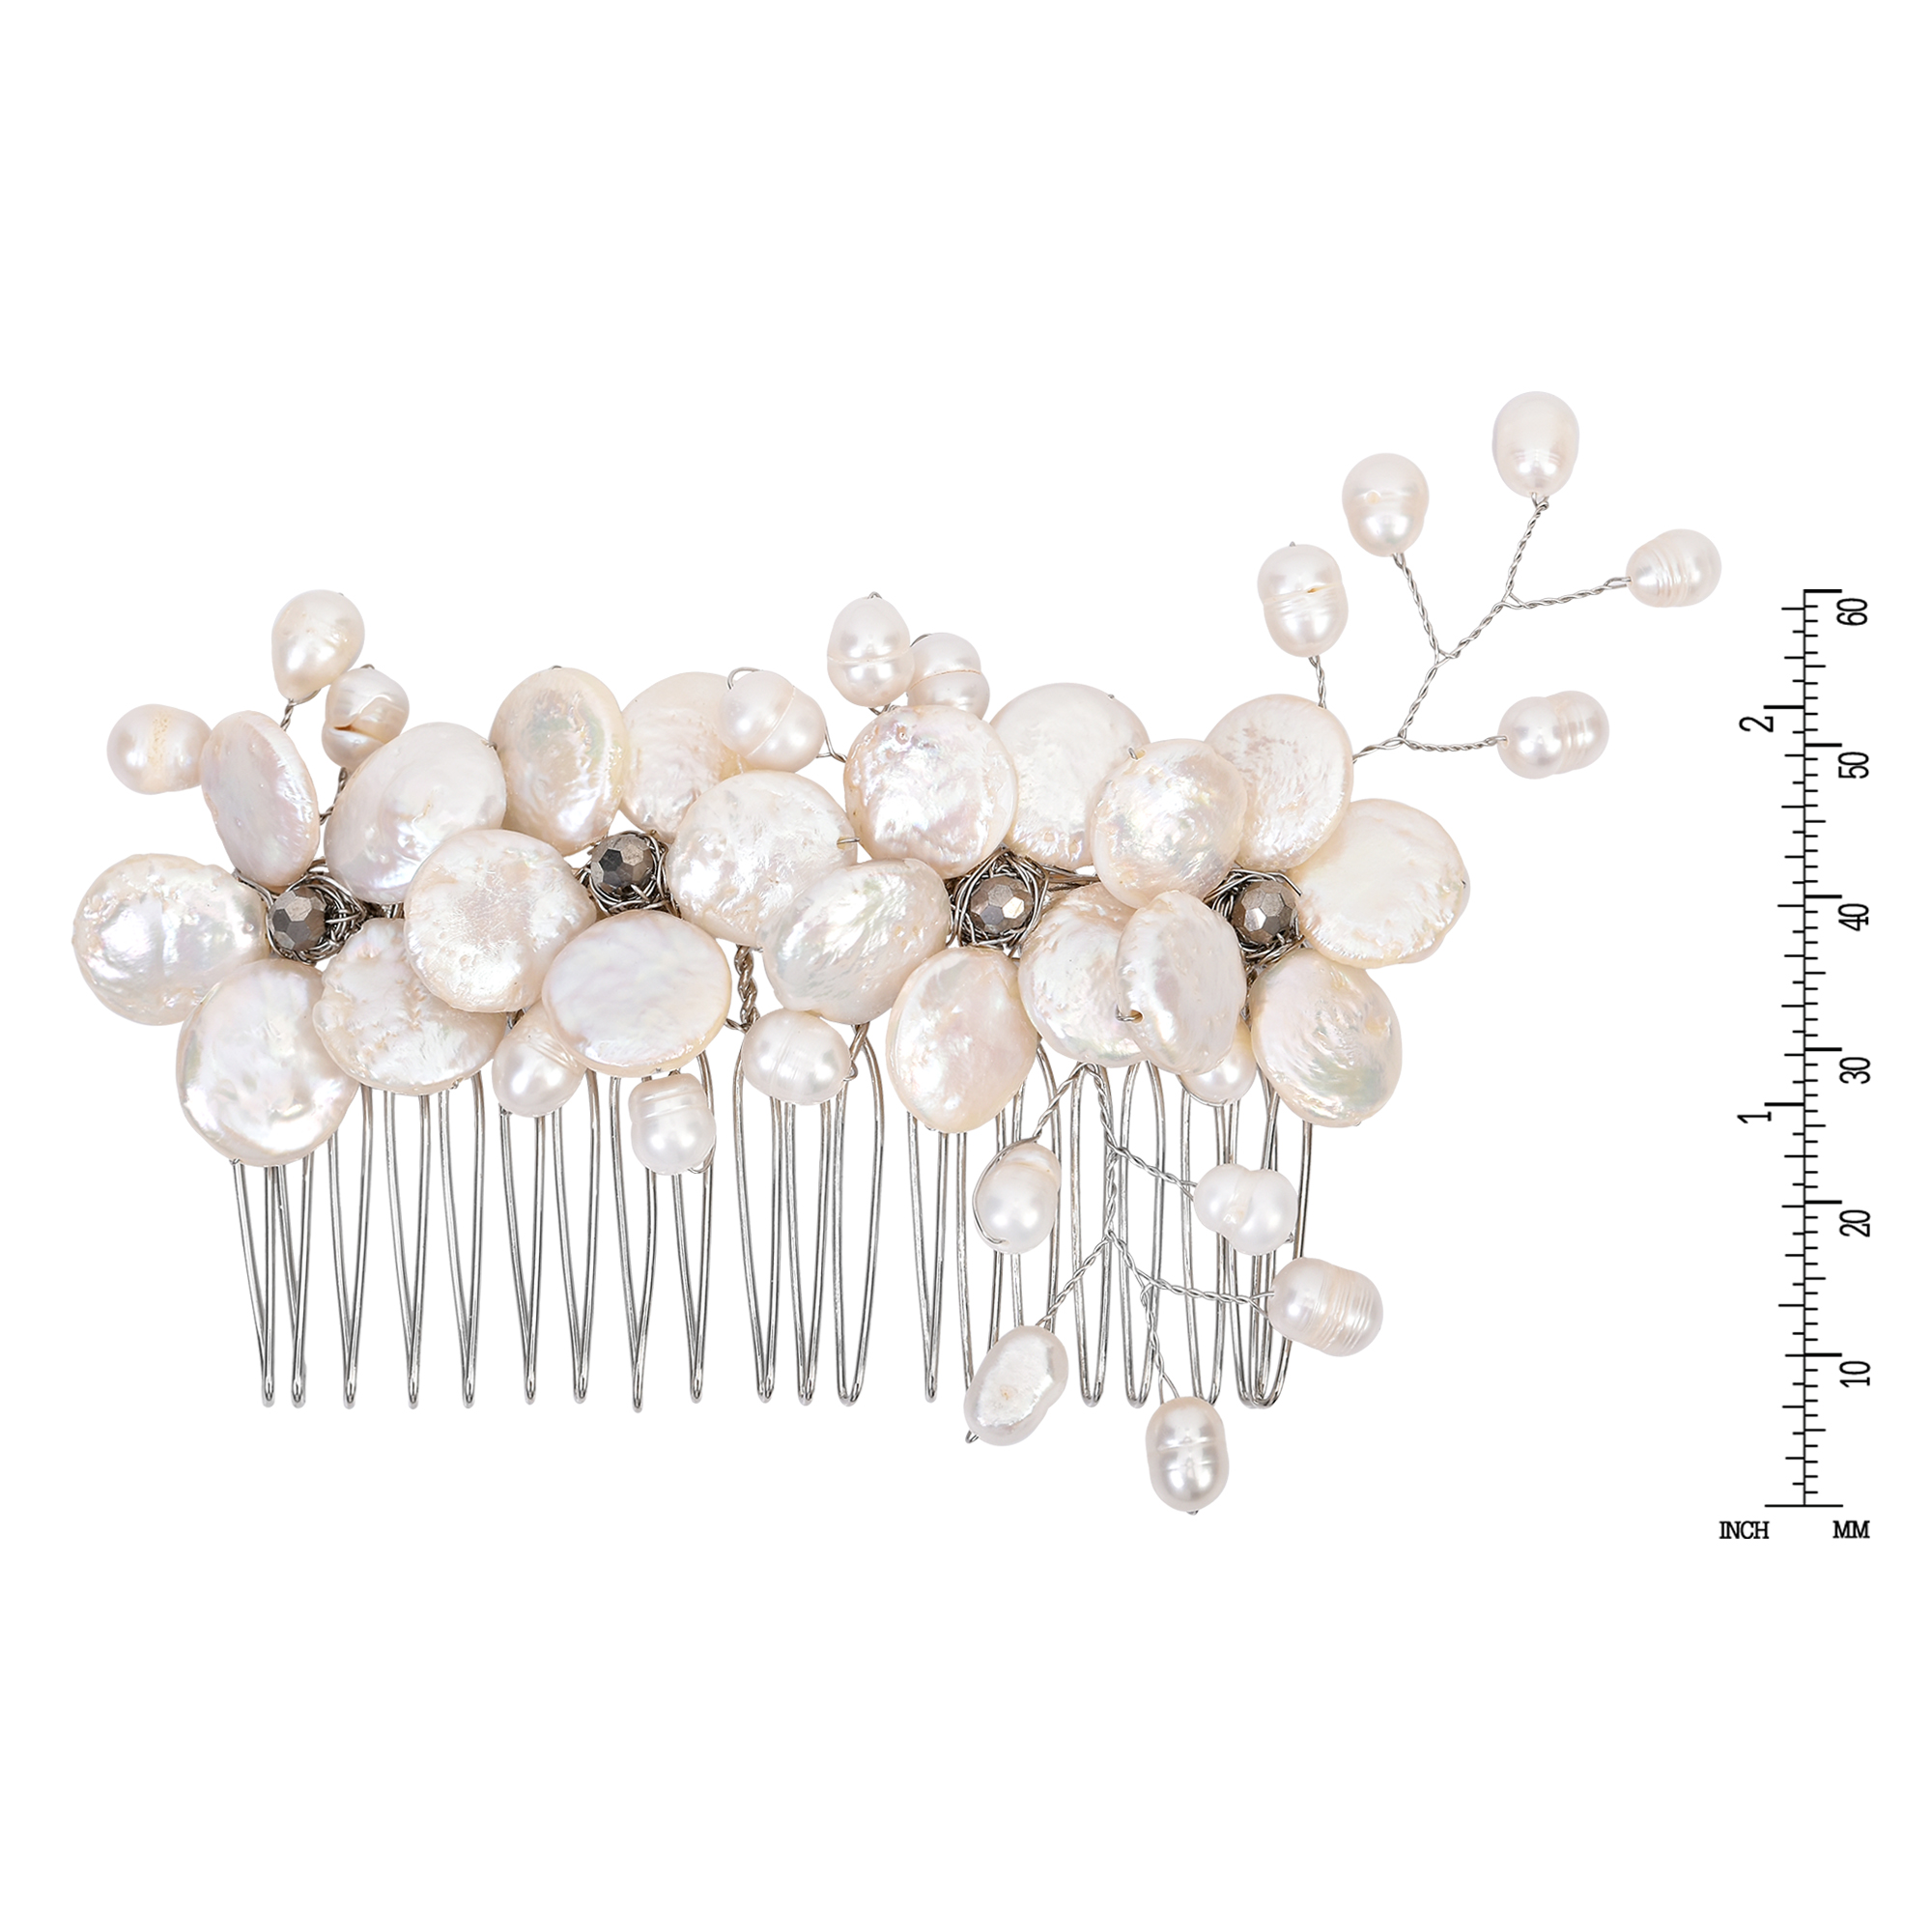 Floral Wreath Freshwater Coin Pearl Bridal Hair Comb - image 2 of 5